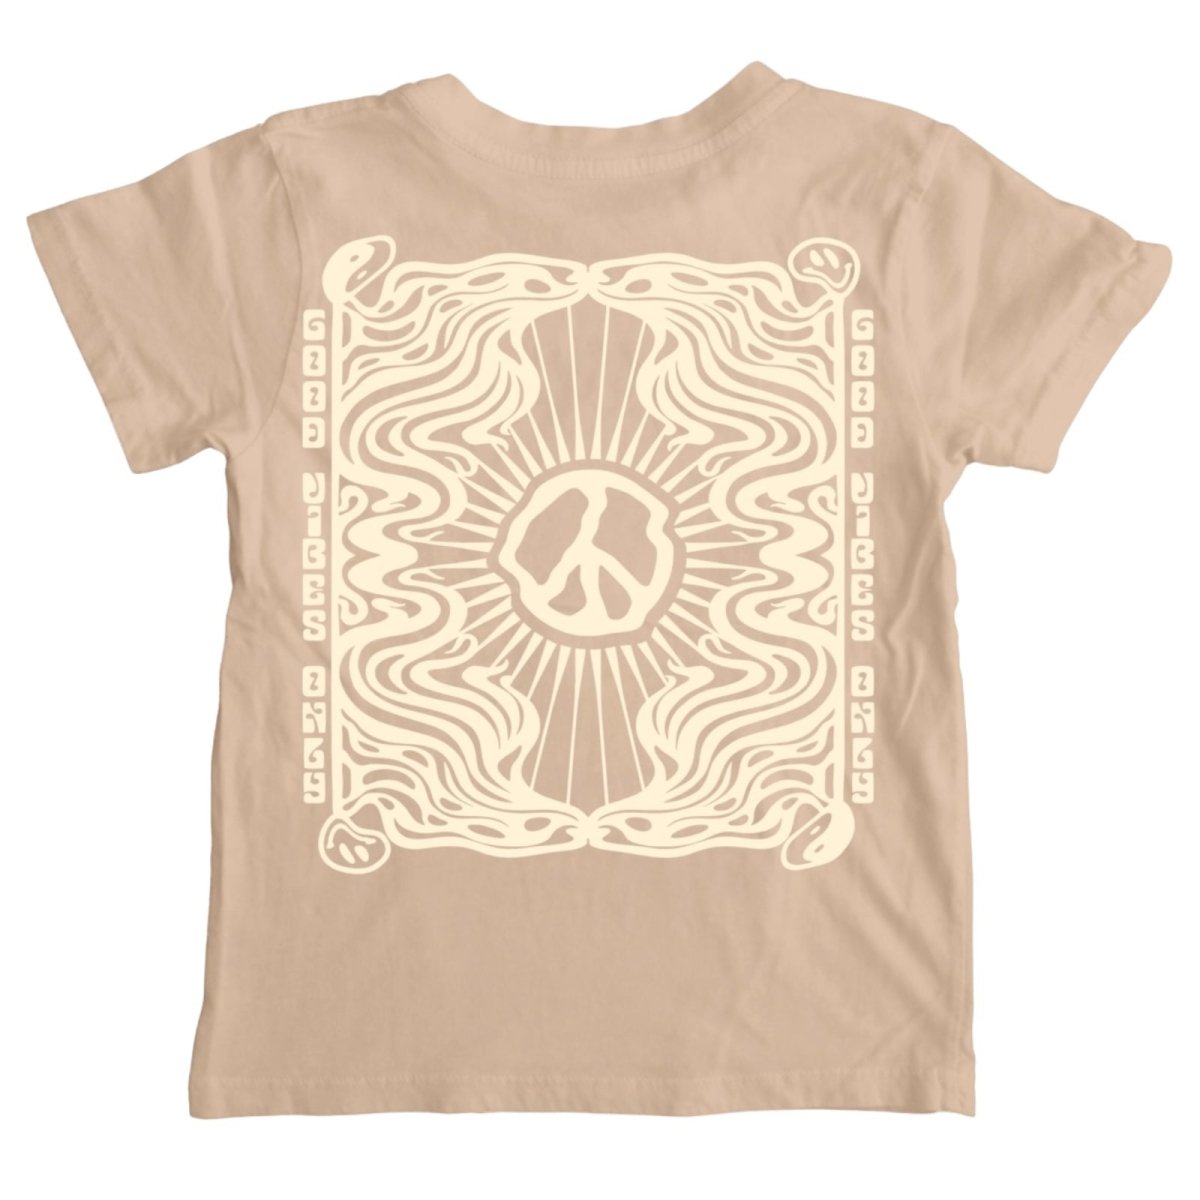 GOOD VIBES PEACE SIGN TSHIRT - TINY WHALES